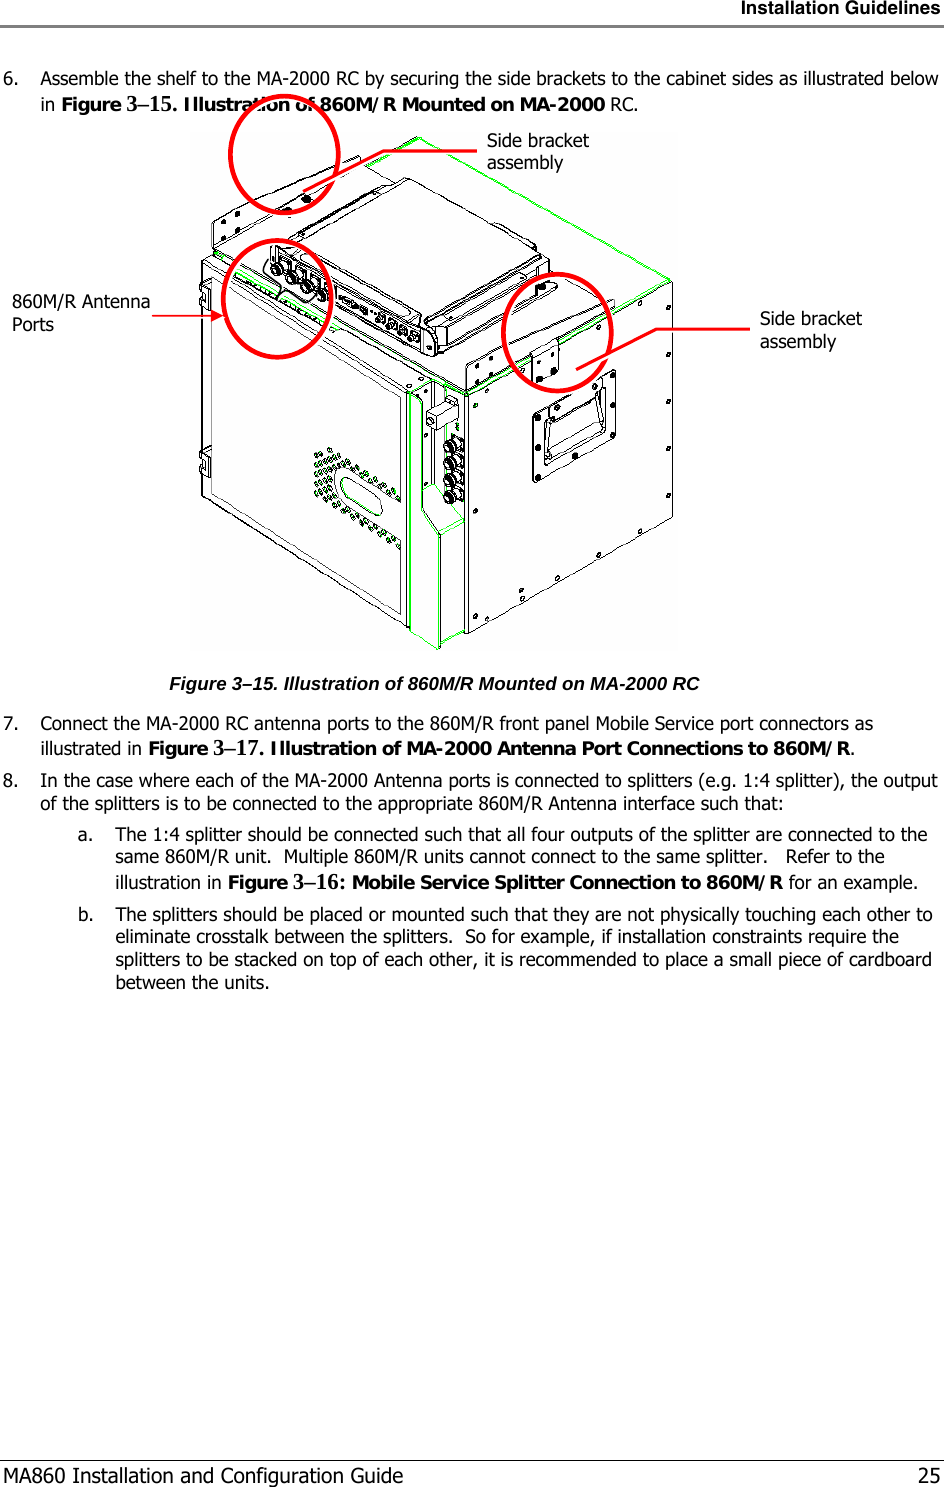 Installation Guidelines  MA860 Installation and Configuration Guide   25 6. Assemble the shelf to the MA-2000 RC by securing the side brackets to the cabinet sides as illustrated below in Figure  3–15. Illustration of 860M/R Mounted on MA-2000 RC.  Figure  3–15. Illustration of 860M/R Mounted on MA-2000 RC 7. Connect the MA-2000 RC antenna ports to the 860M/R front panel Mobile Service port connectors as illustrated in Figure  3–17. Illustration of MA-2000 Antenna Port Connections to 860M/R. 8. In the case where each of the MA-2000 Antenna ports is connected to splitters (e.g. 1:4 splitter), the output of the splitters is to be connected to the appropriate 860M/R Antenna interface such that: a. The 1:4 splitter should be connected such that all four outputs of the splitter are connected to the same 860M/R unit.  Multiple 860M/R units cannot connect to the same splitter.   Refer to the illustration in Figure  3–16: Mobile Service Splitter Connection to 860M/R for an example.  b. The splitters should be placed or mounted such that they are not physically touching each other to eliminate crosstalk between the splitters.  So for example, if installation constraints require the splitters to be stacked on top of each other, it is recommended to place a small piece of cardboard between the units. 860M/R Antenna Ports Side bracket assembly Side bracket assembly 